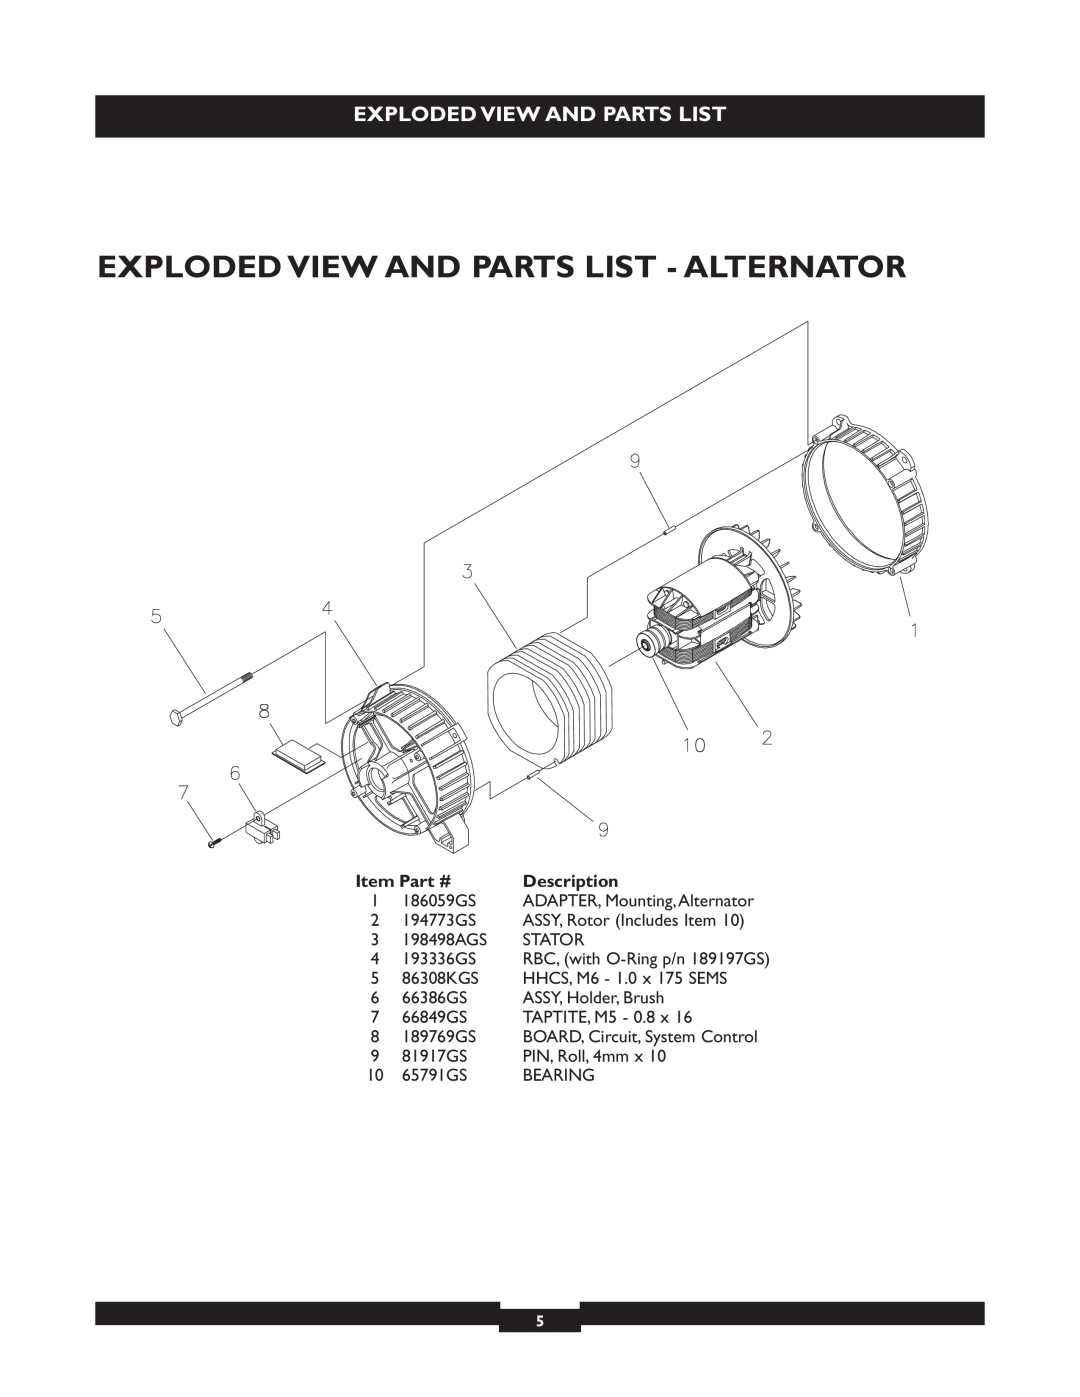 Briggs & Stratton 30254 manual Exploded View And Parts List - Alternator, Description 